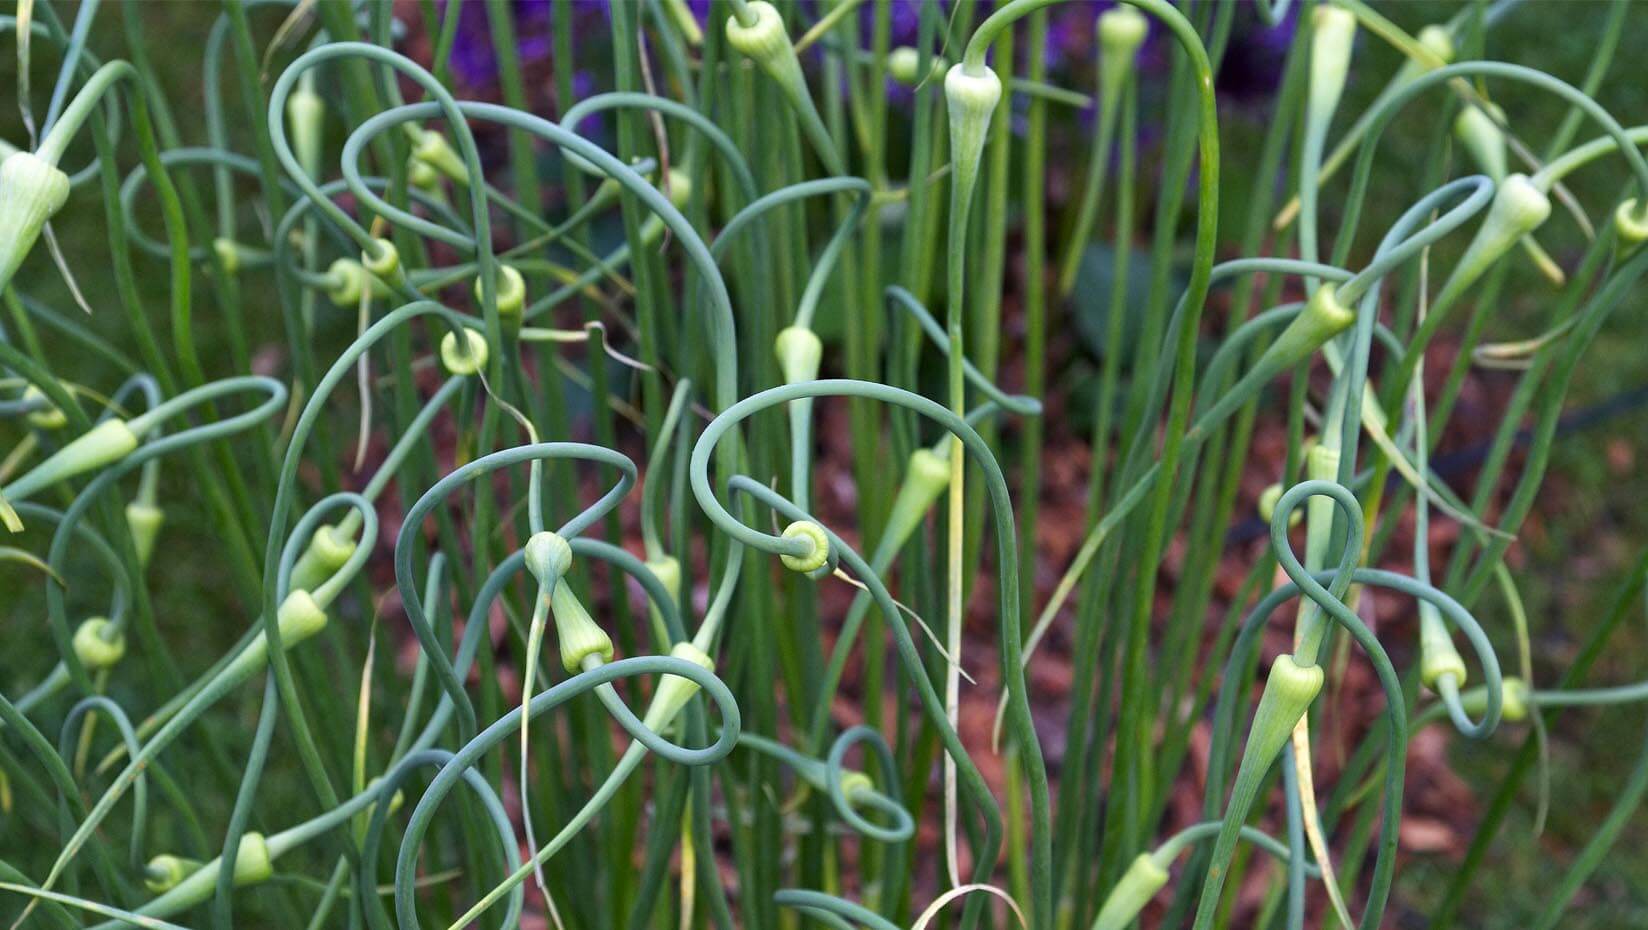 A photo of coiled garlic scapes